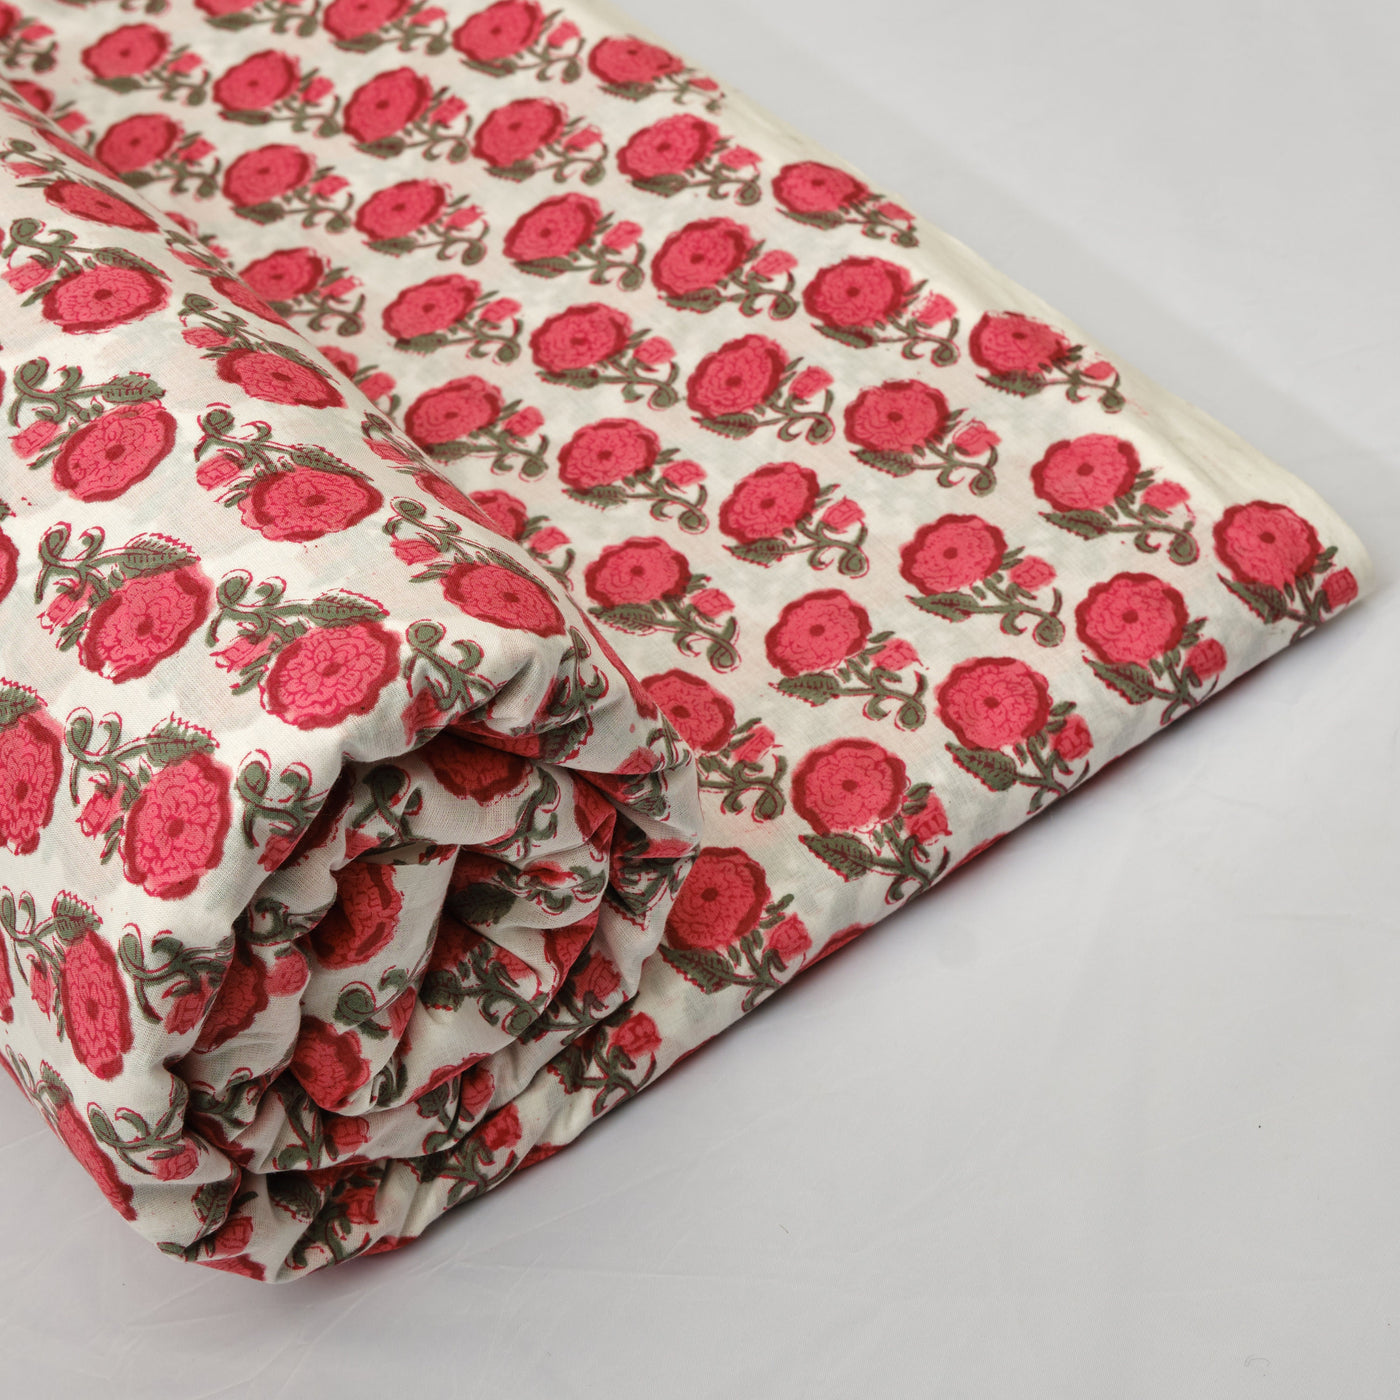 Fabricrush Raspberry Red, Army Green Indian Floral Hand Block Printed 100% Pure Cotton Cloth, Women's clothing, Fabric for Curtains Pillows Dresses Bag